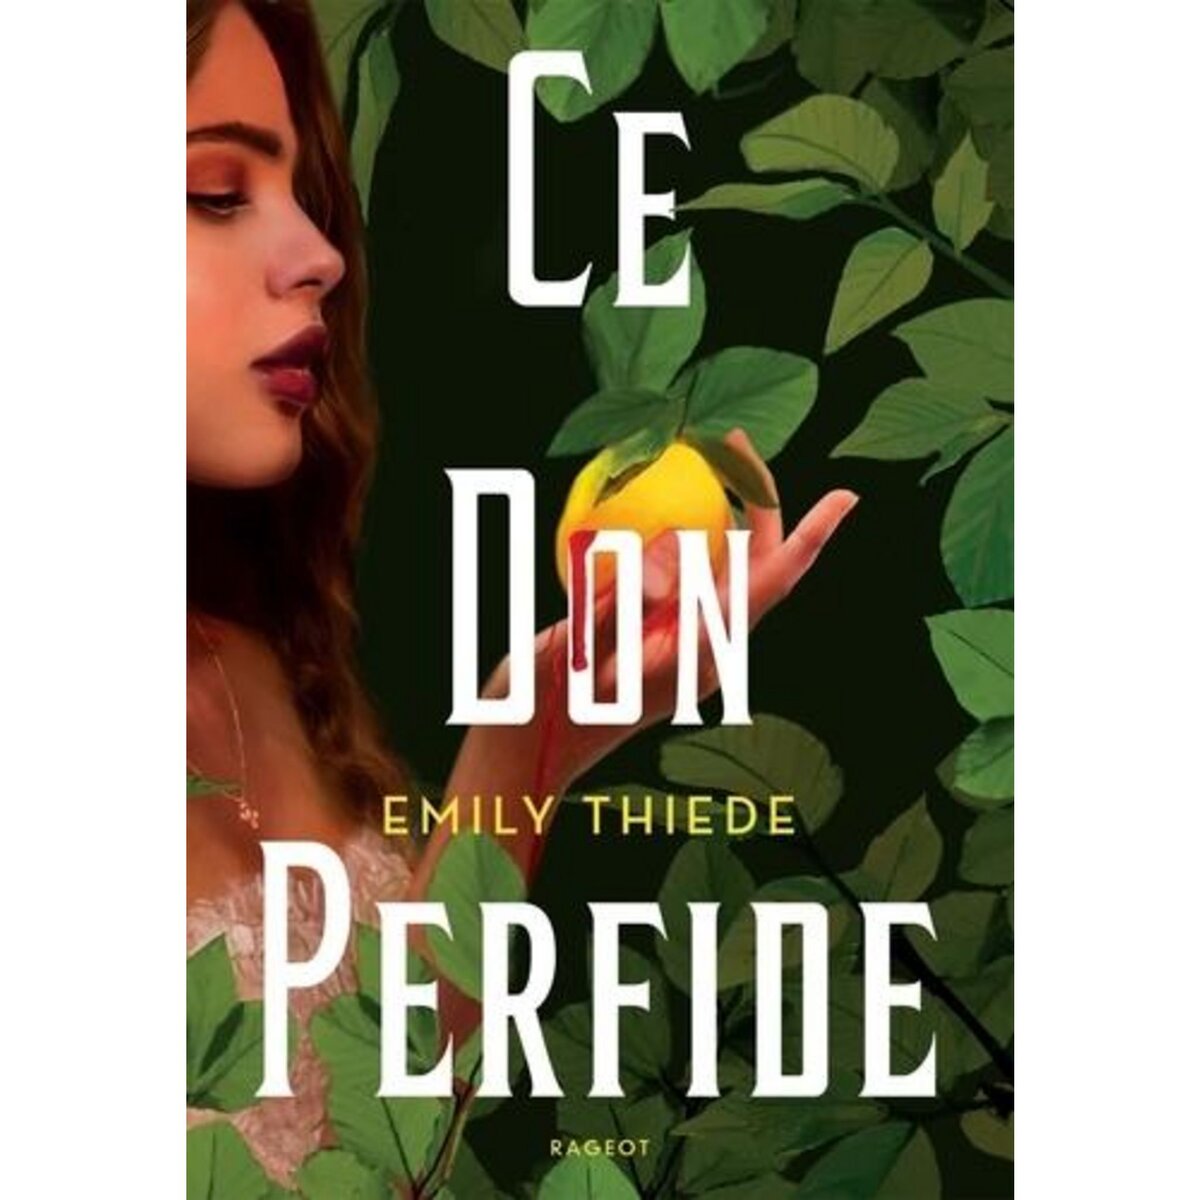  CE DON PERFIDE, Thiede Emily